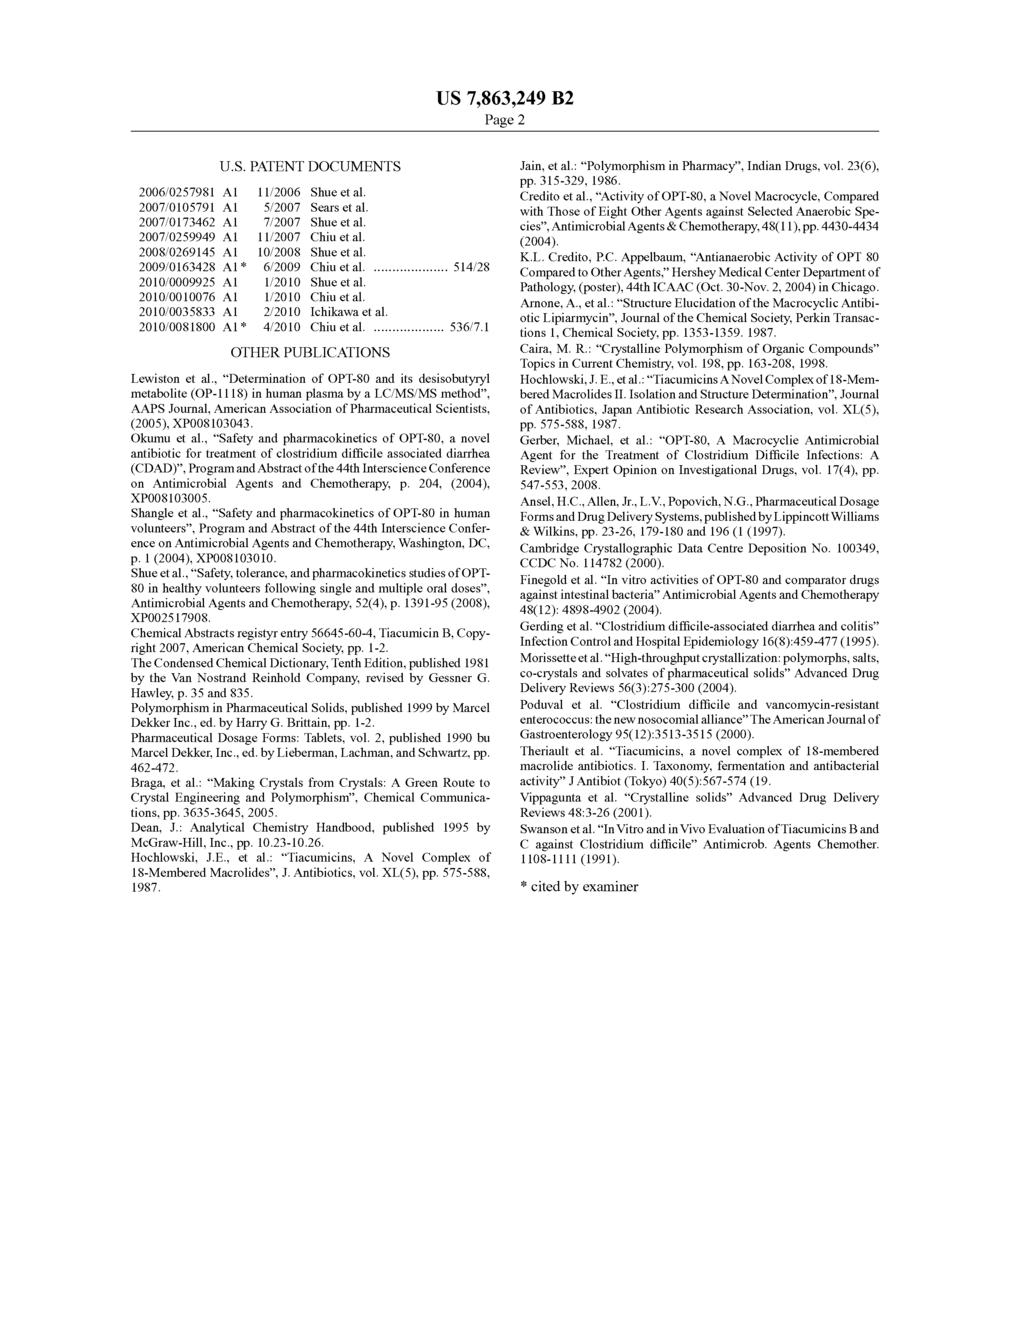 Case 2:15-cv-06541-WHW-CLW Document 1